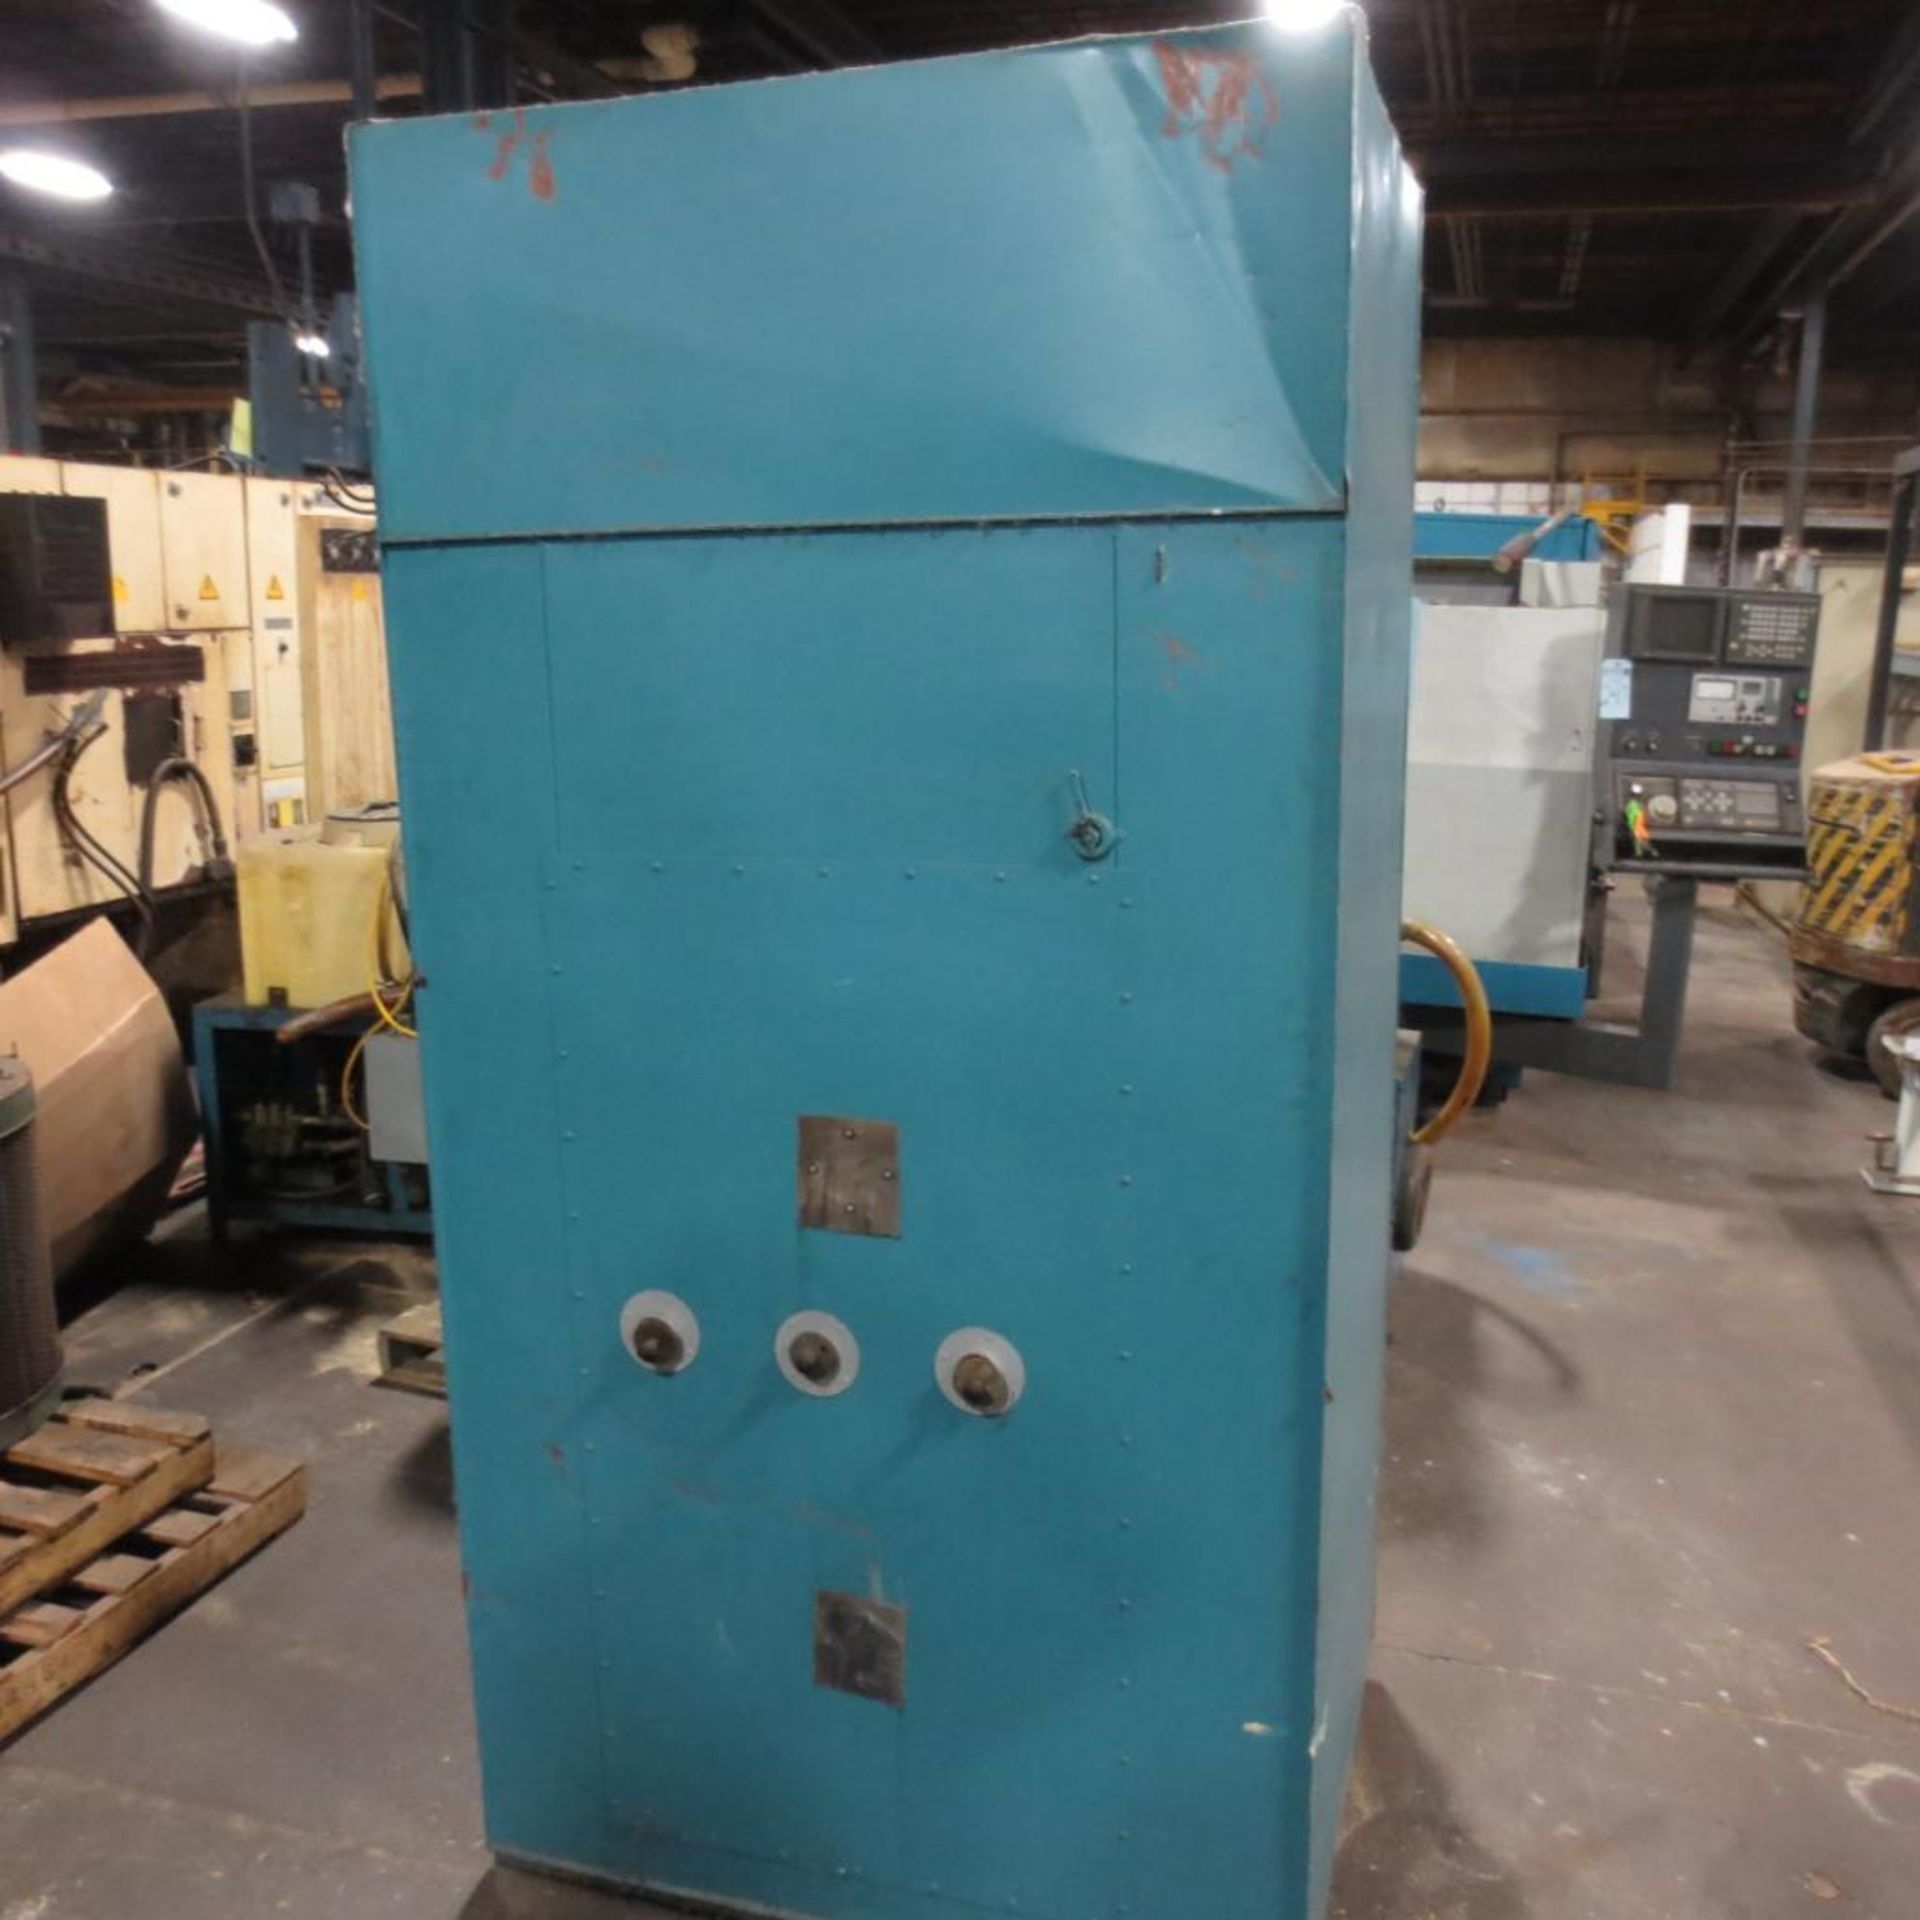 Despatch Type BBC-210 Oven, Temp 500 F, 12 KW, 3/1 PH, 240 / 120 V, S/N 102168. Loading Fee is $50.0 - Image 4 of 4